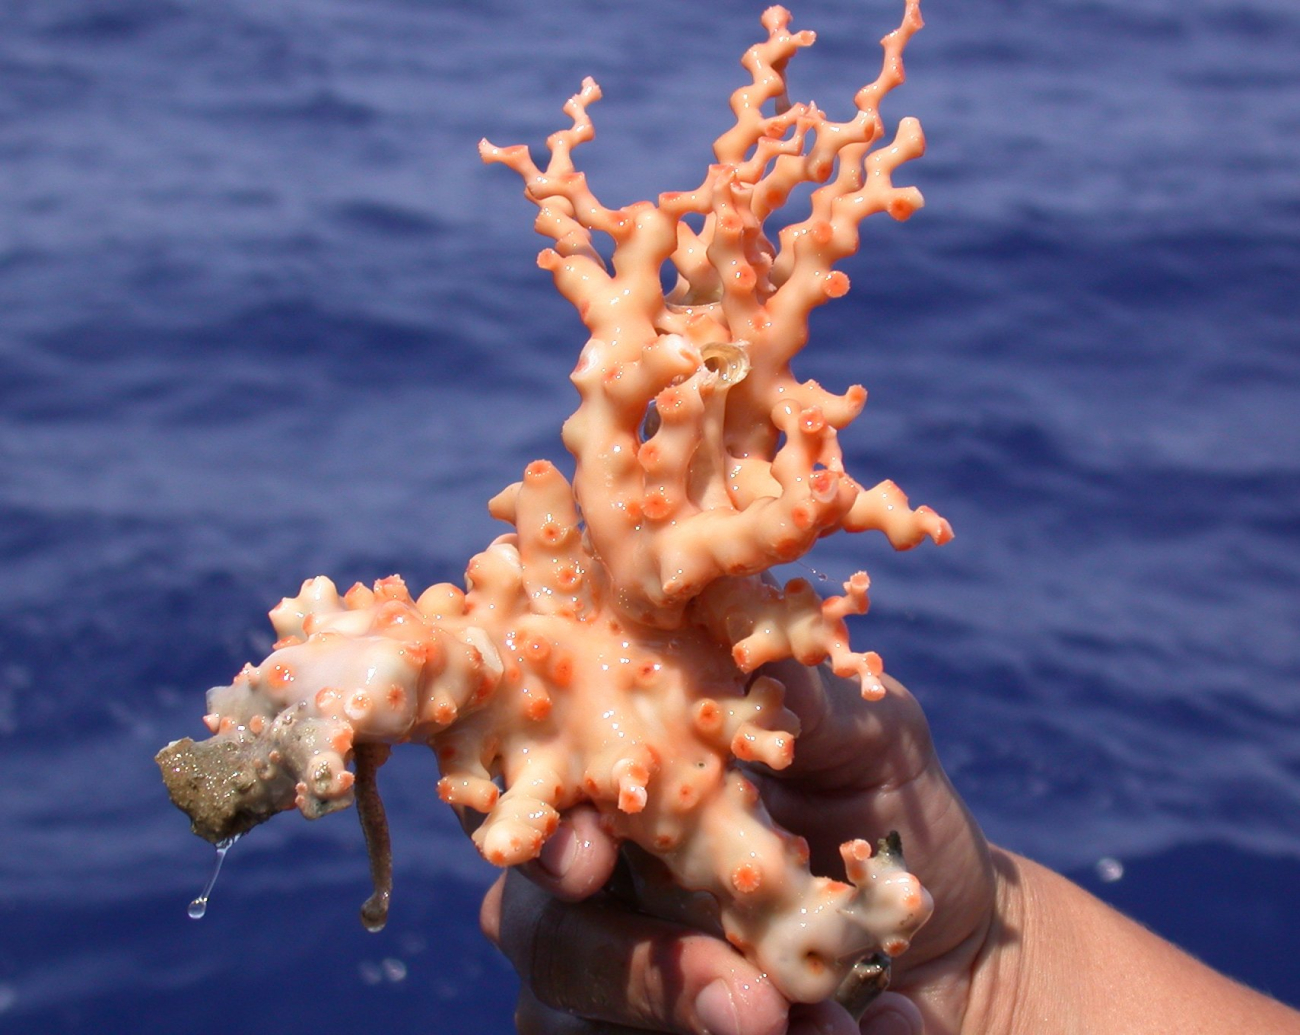 This beautiful pale orange coral was collected at the Lophelia coral banks